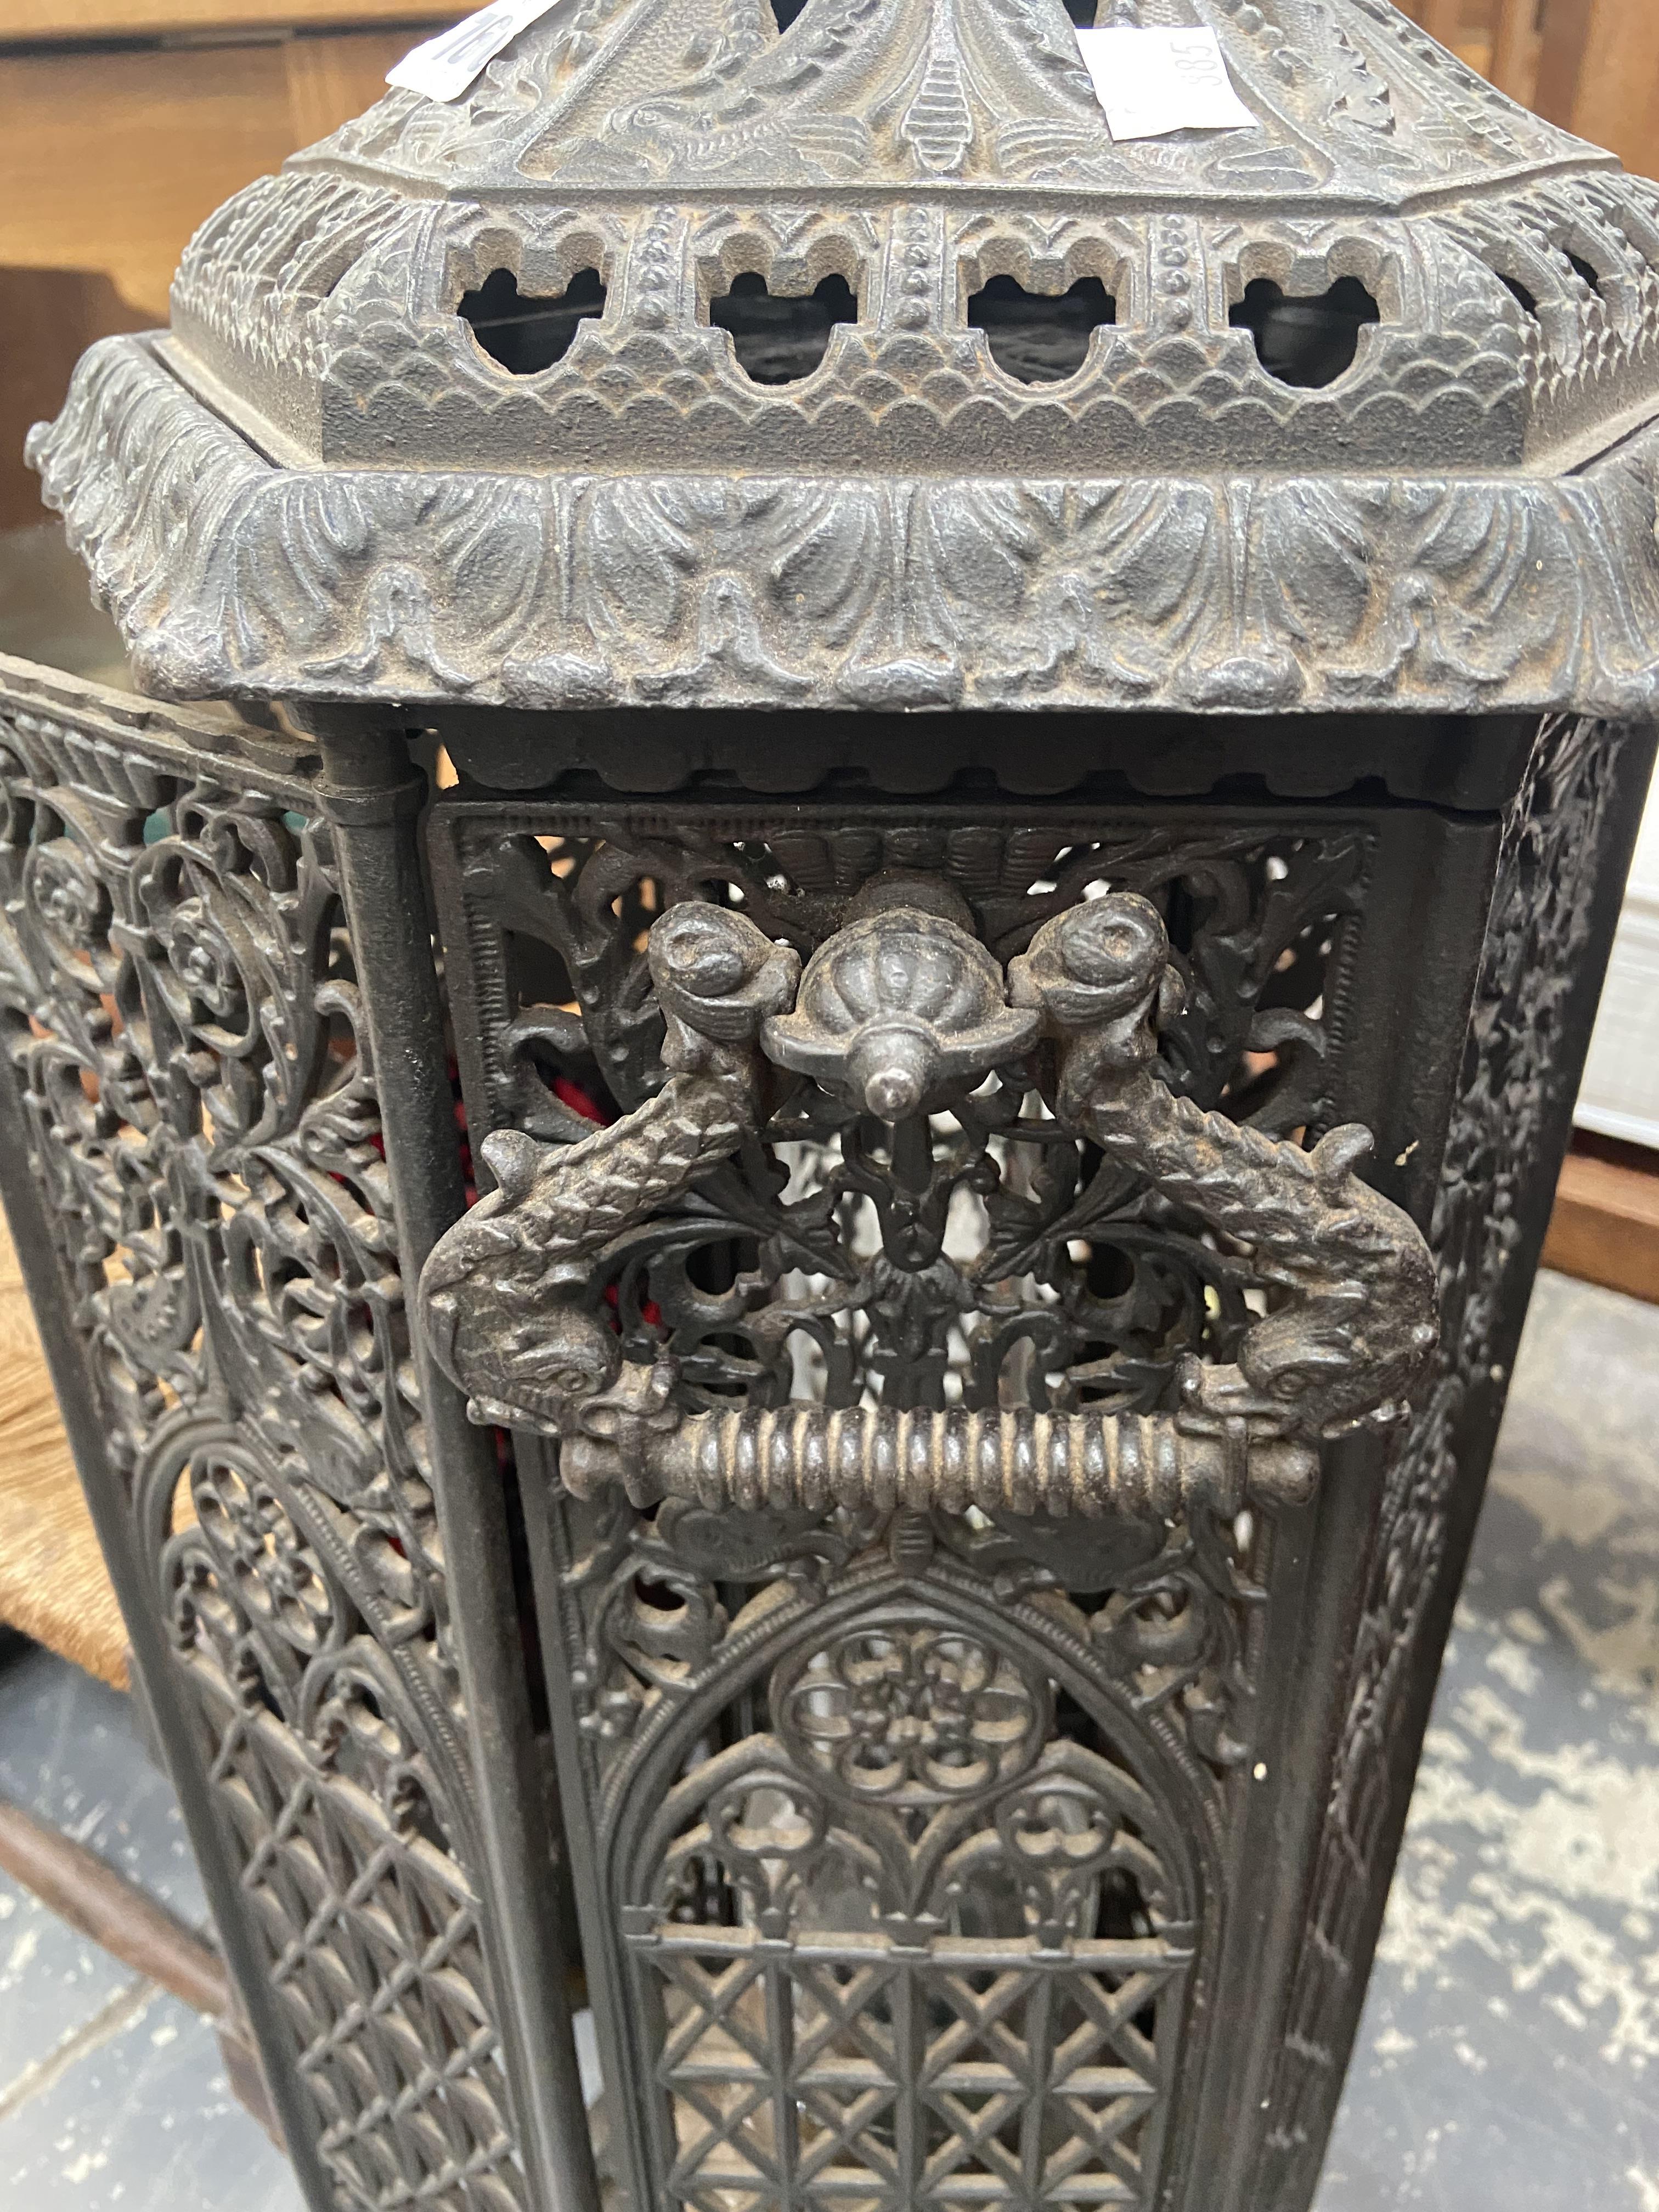 A CAST IRON CONSERVATORY HEATER. H 70 x w 30 cms. - Image 2 of 7